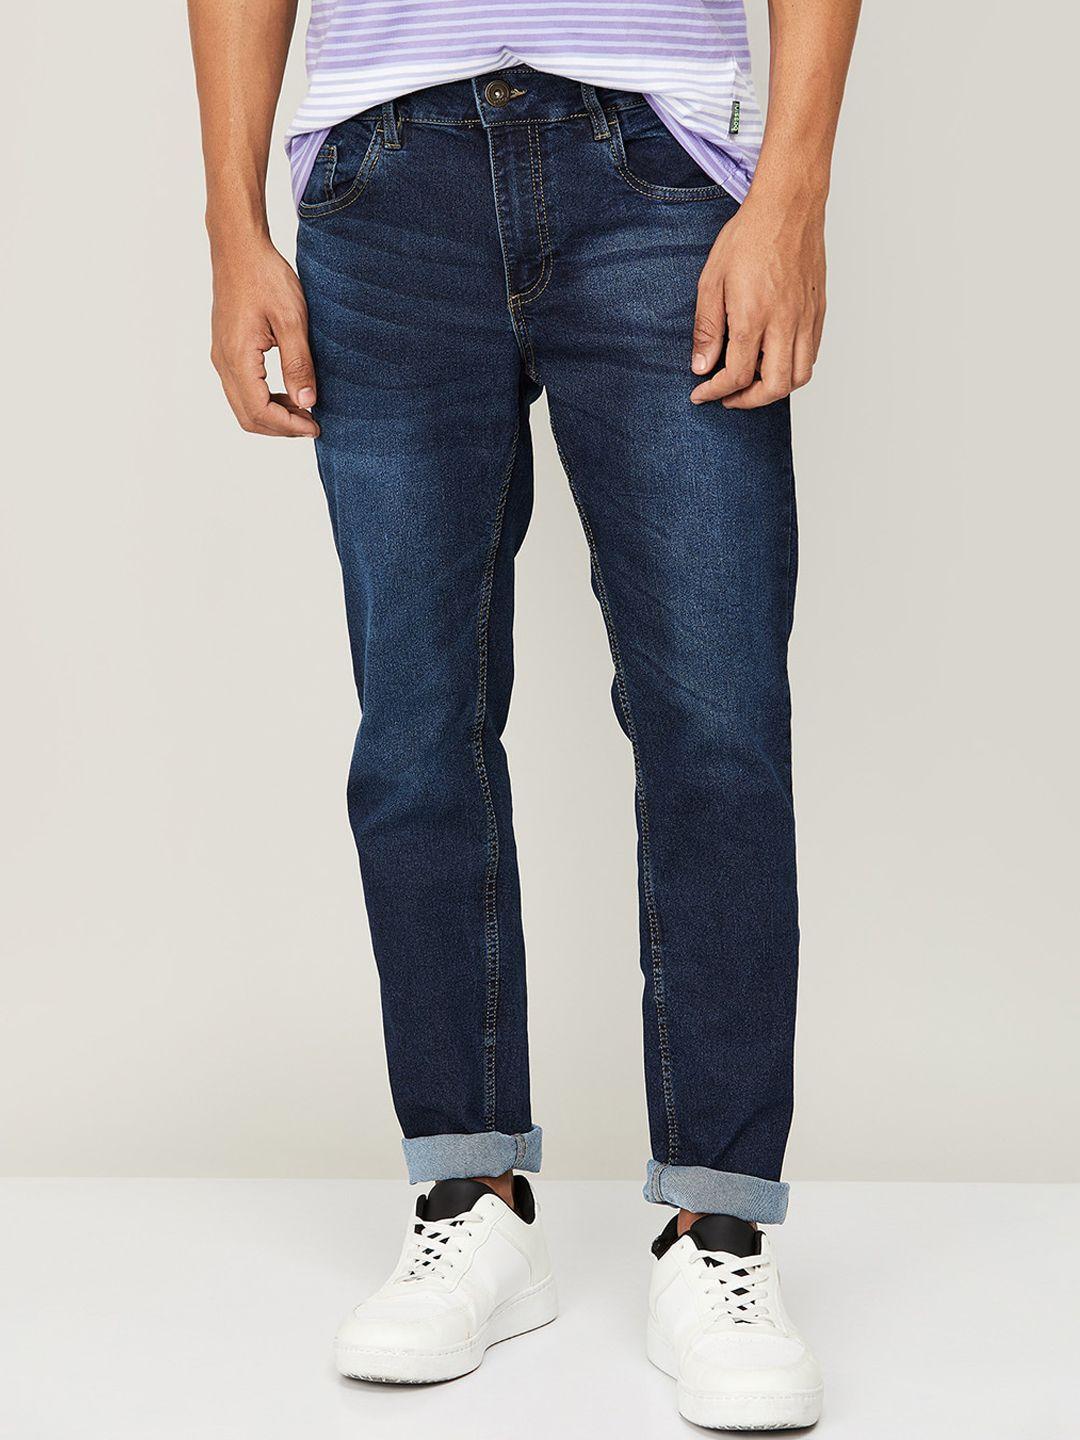 forca by lifestyle men blue light fade jeans